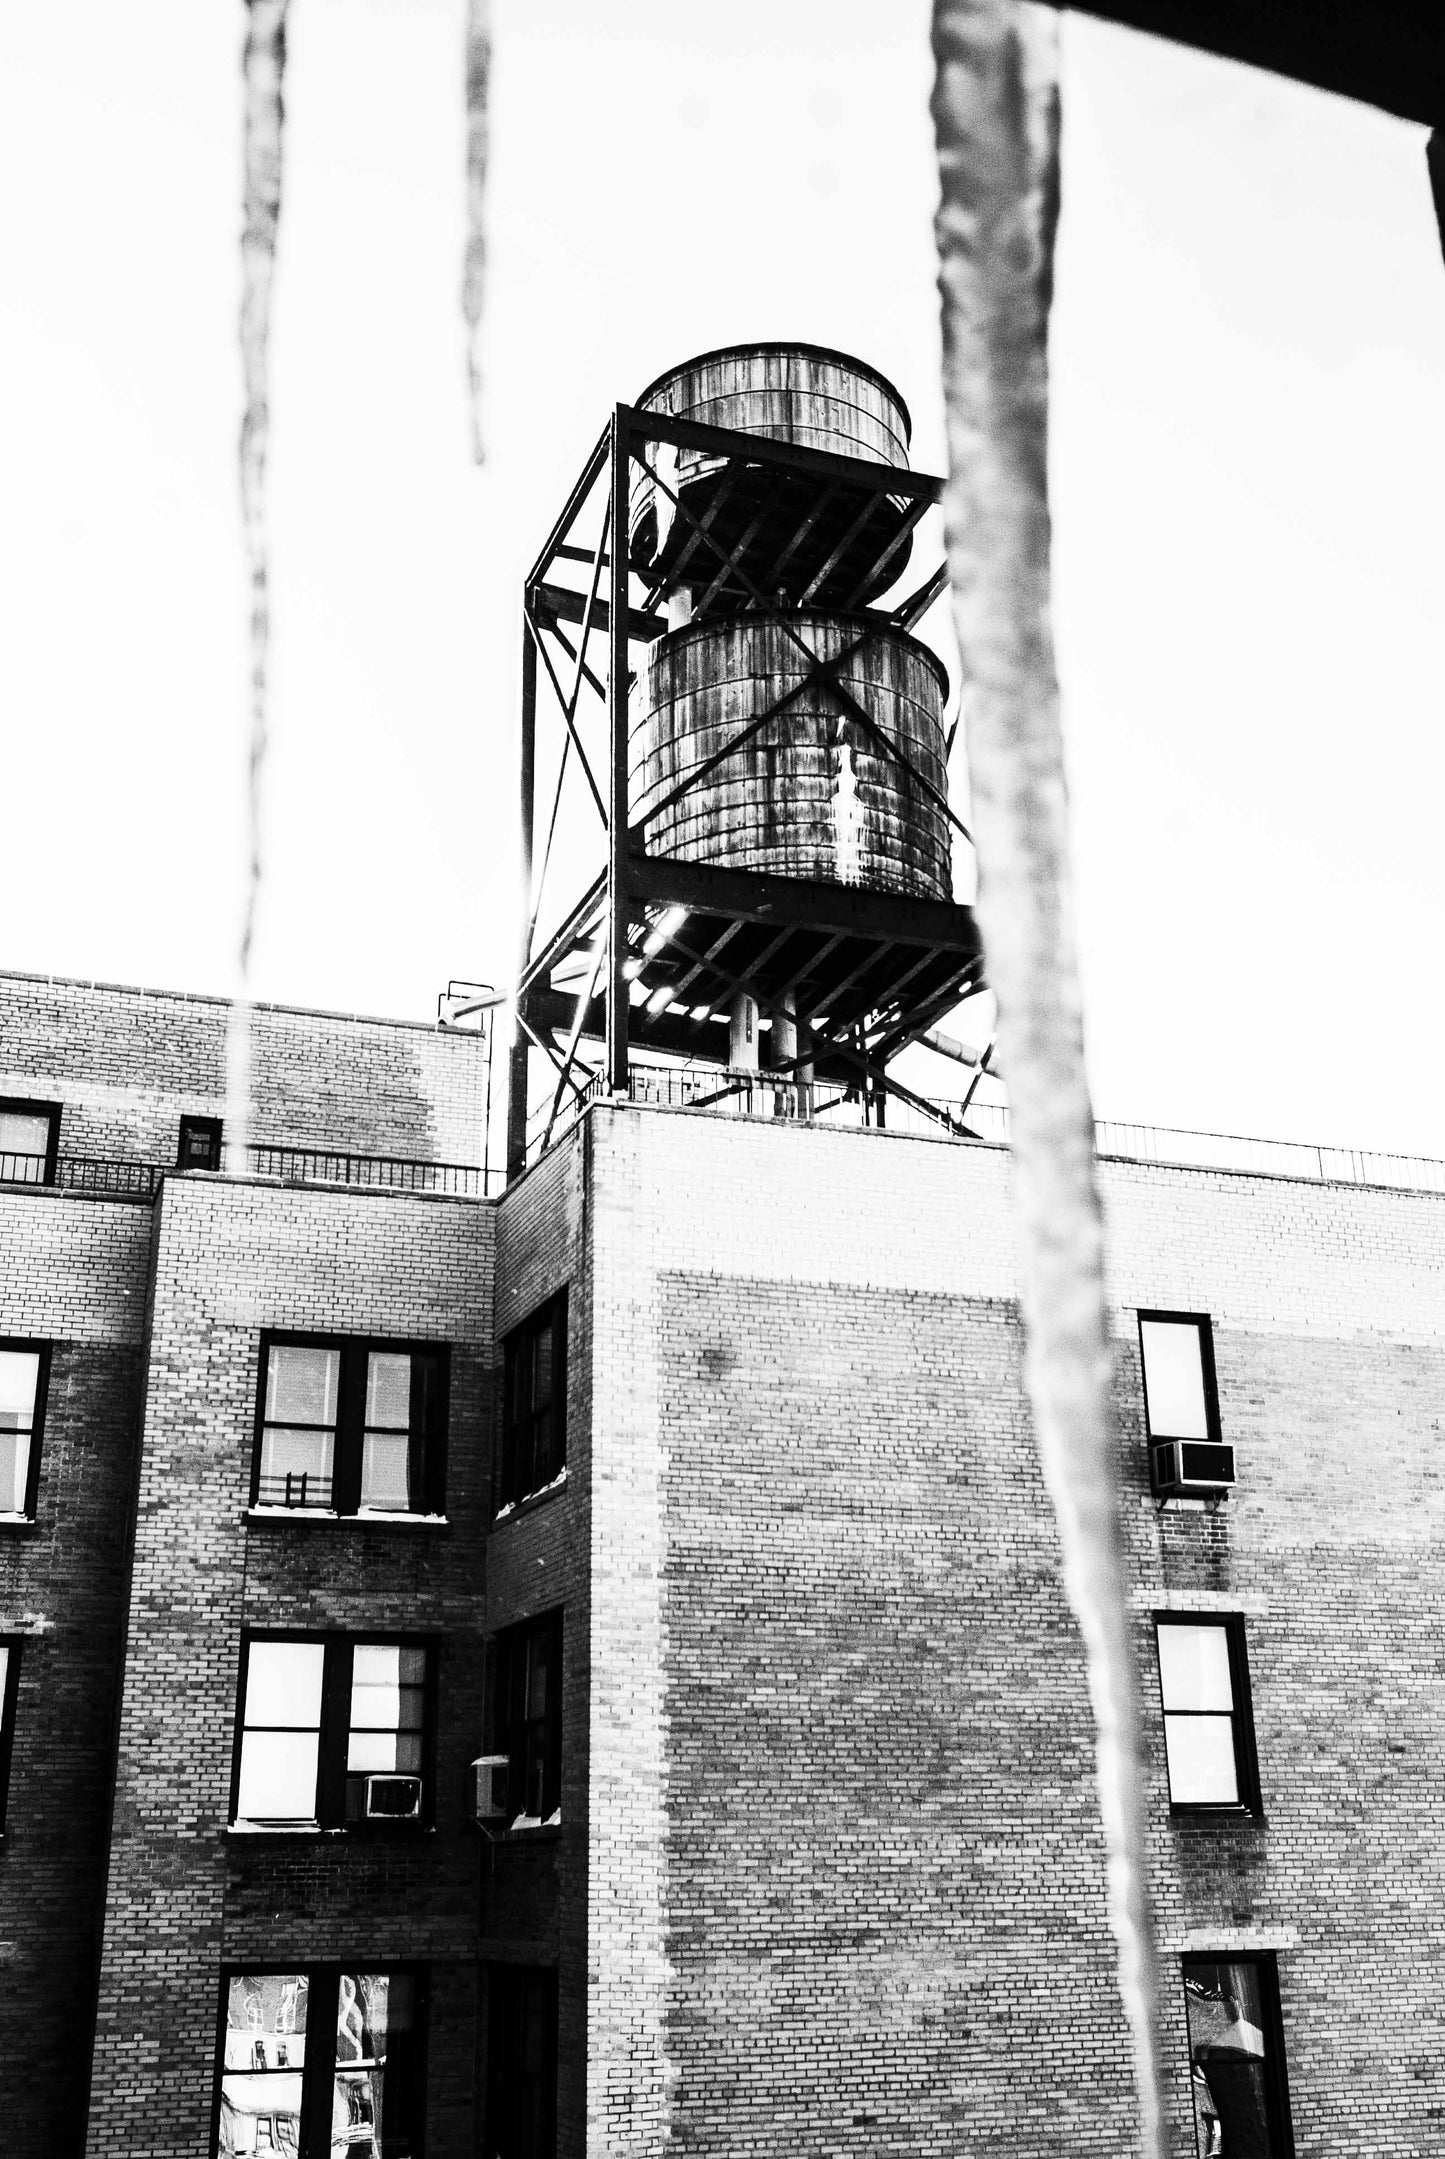 THE RIGHT OF A WATER TANK TO BE, Upper West Side, New York